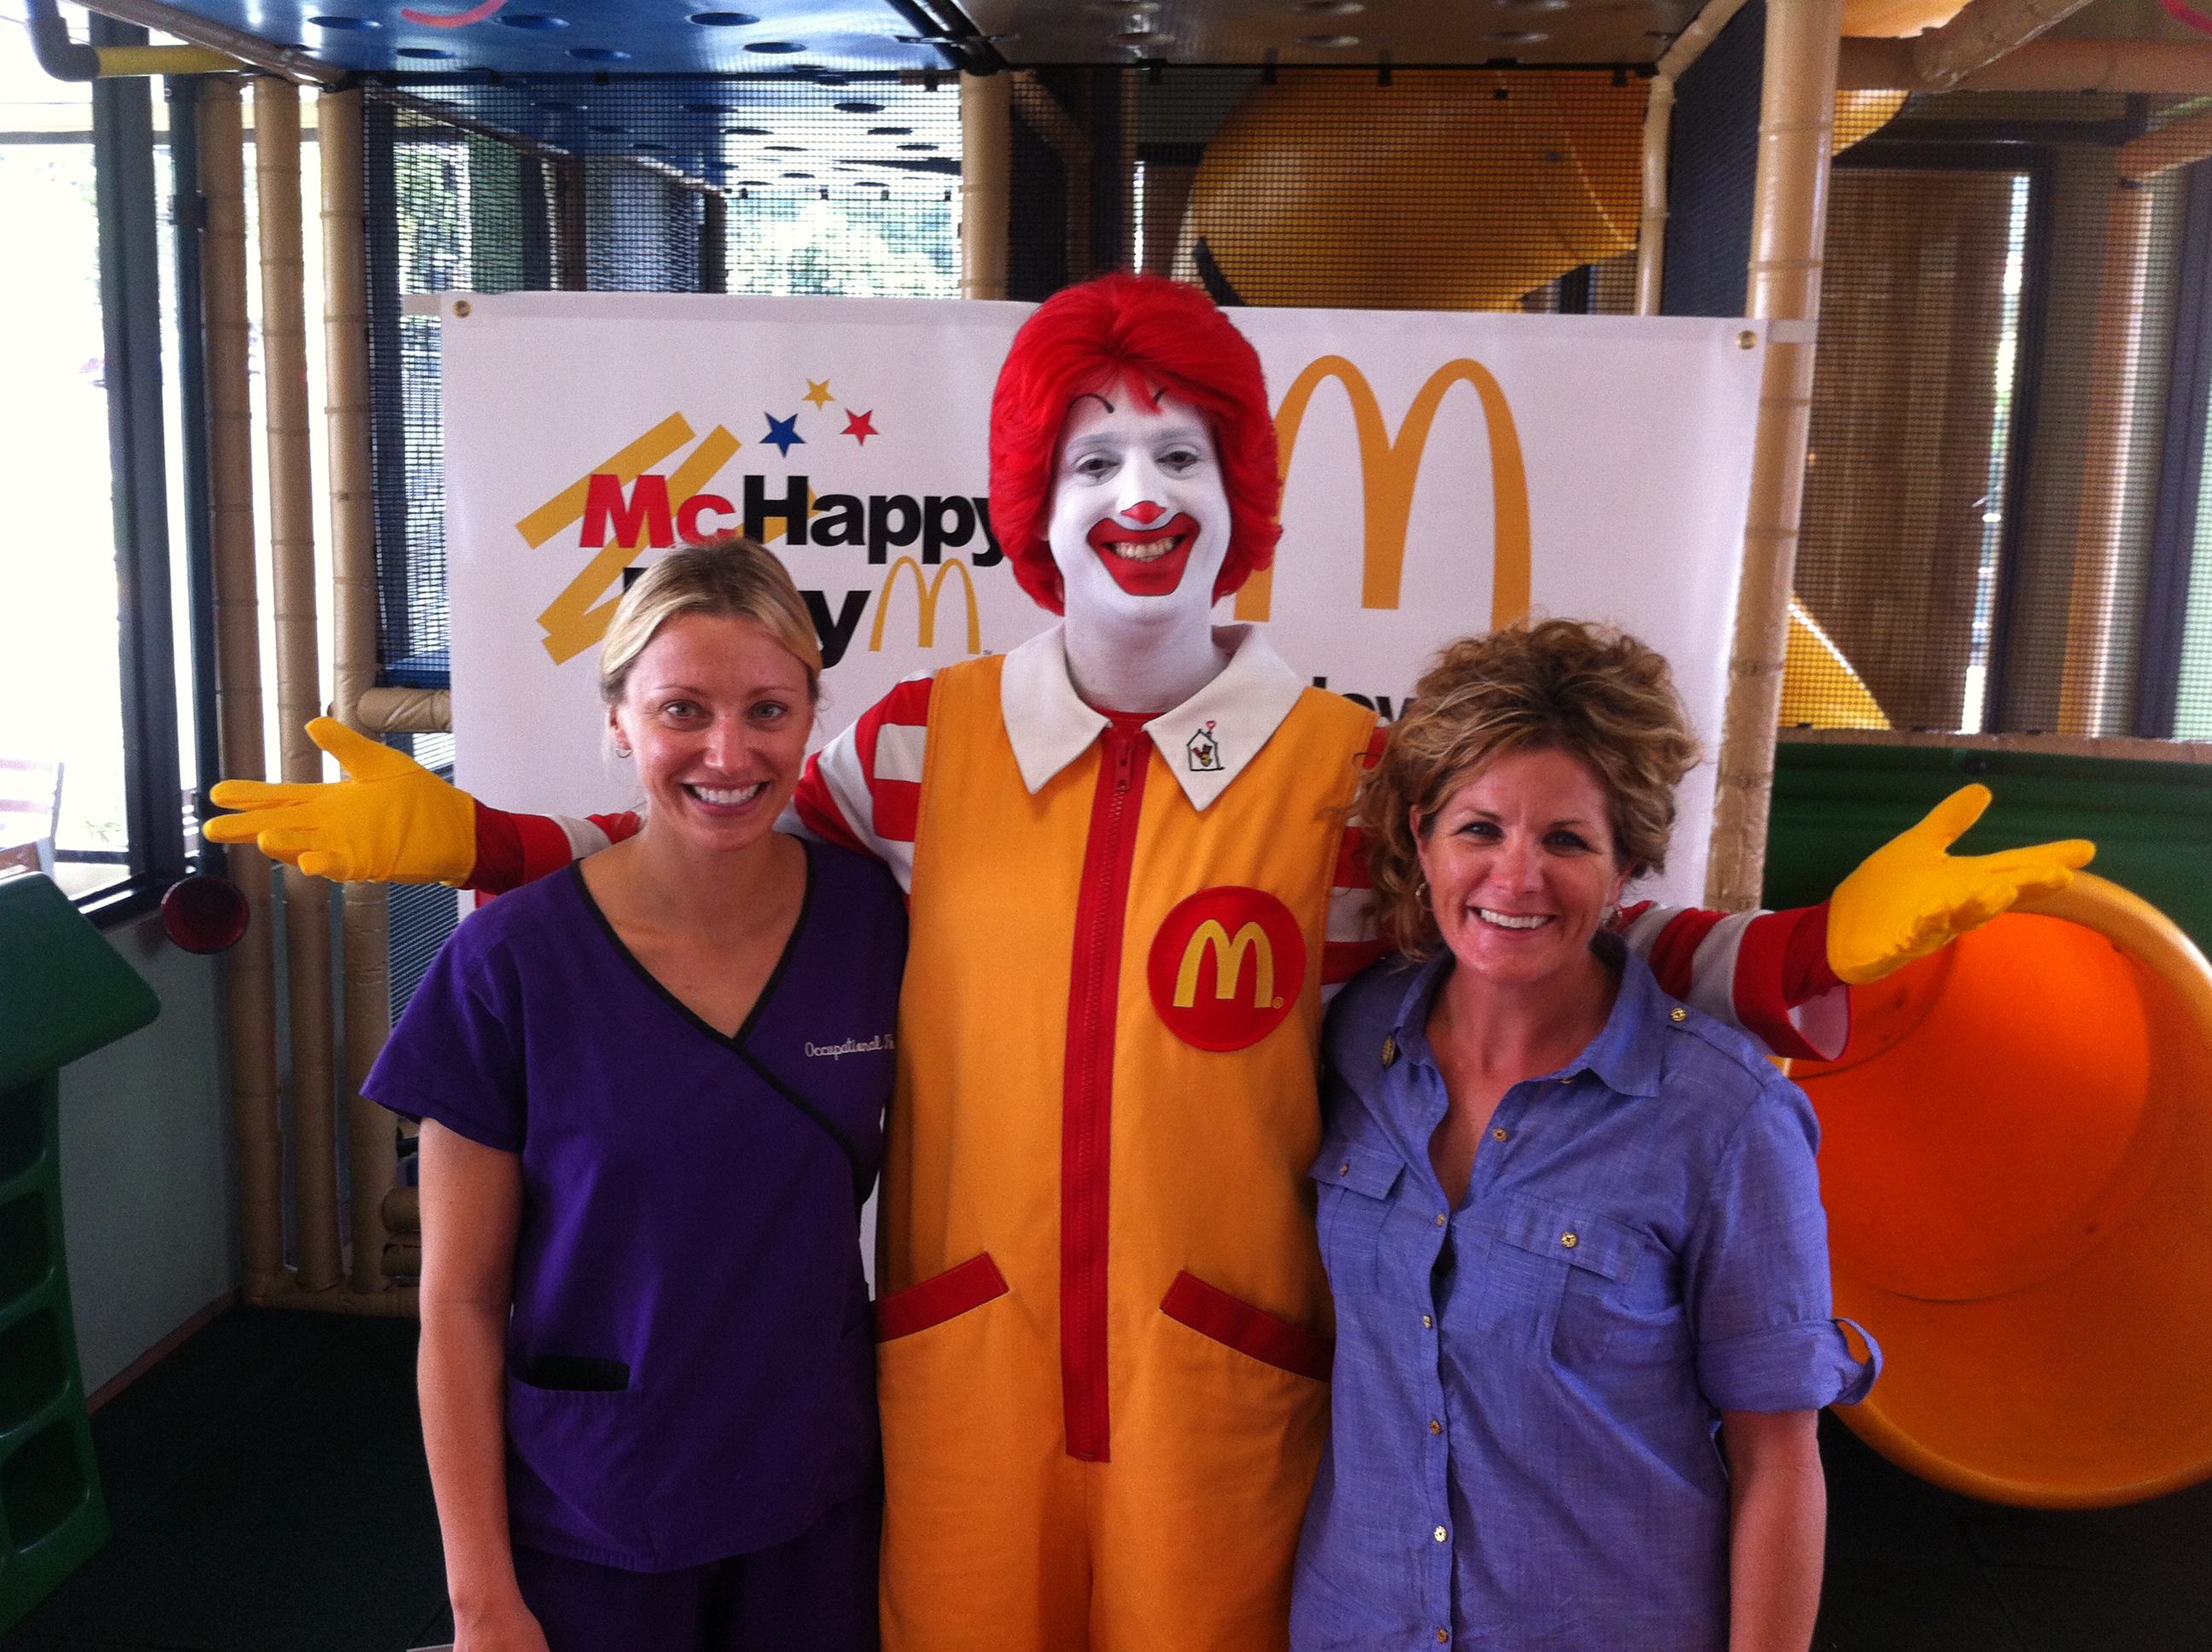 TADA Therapists Kelly Neevel and Lisa Parfitt celebrate the launch of the 2012 McHappy Day Campaign with Ronald McDonald who Kicks Off McHappy Day on St. Thomas